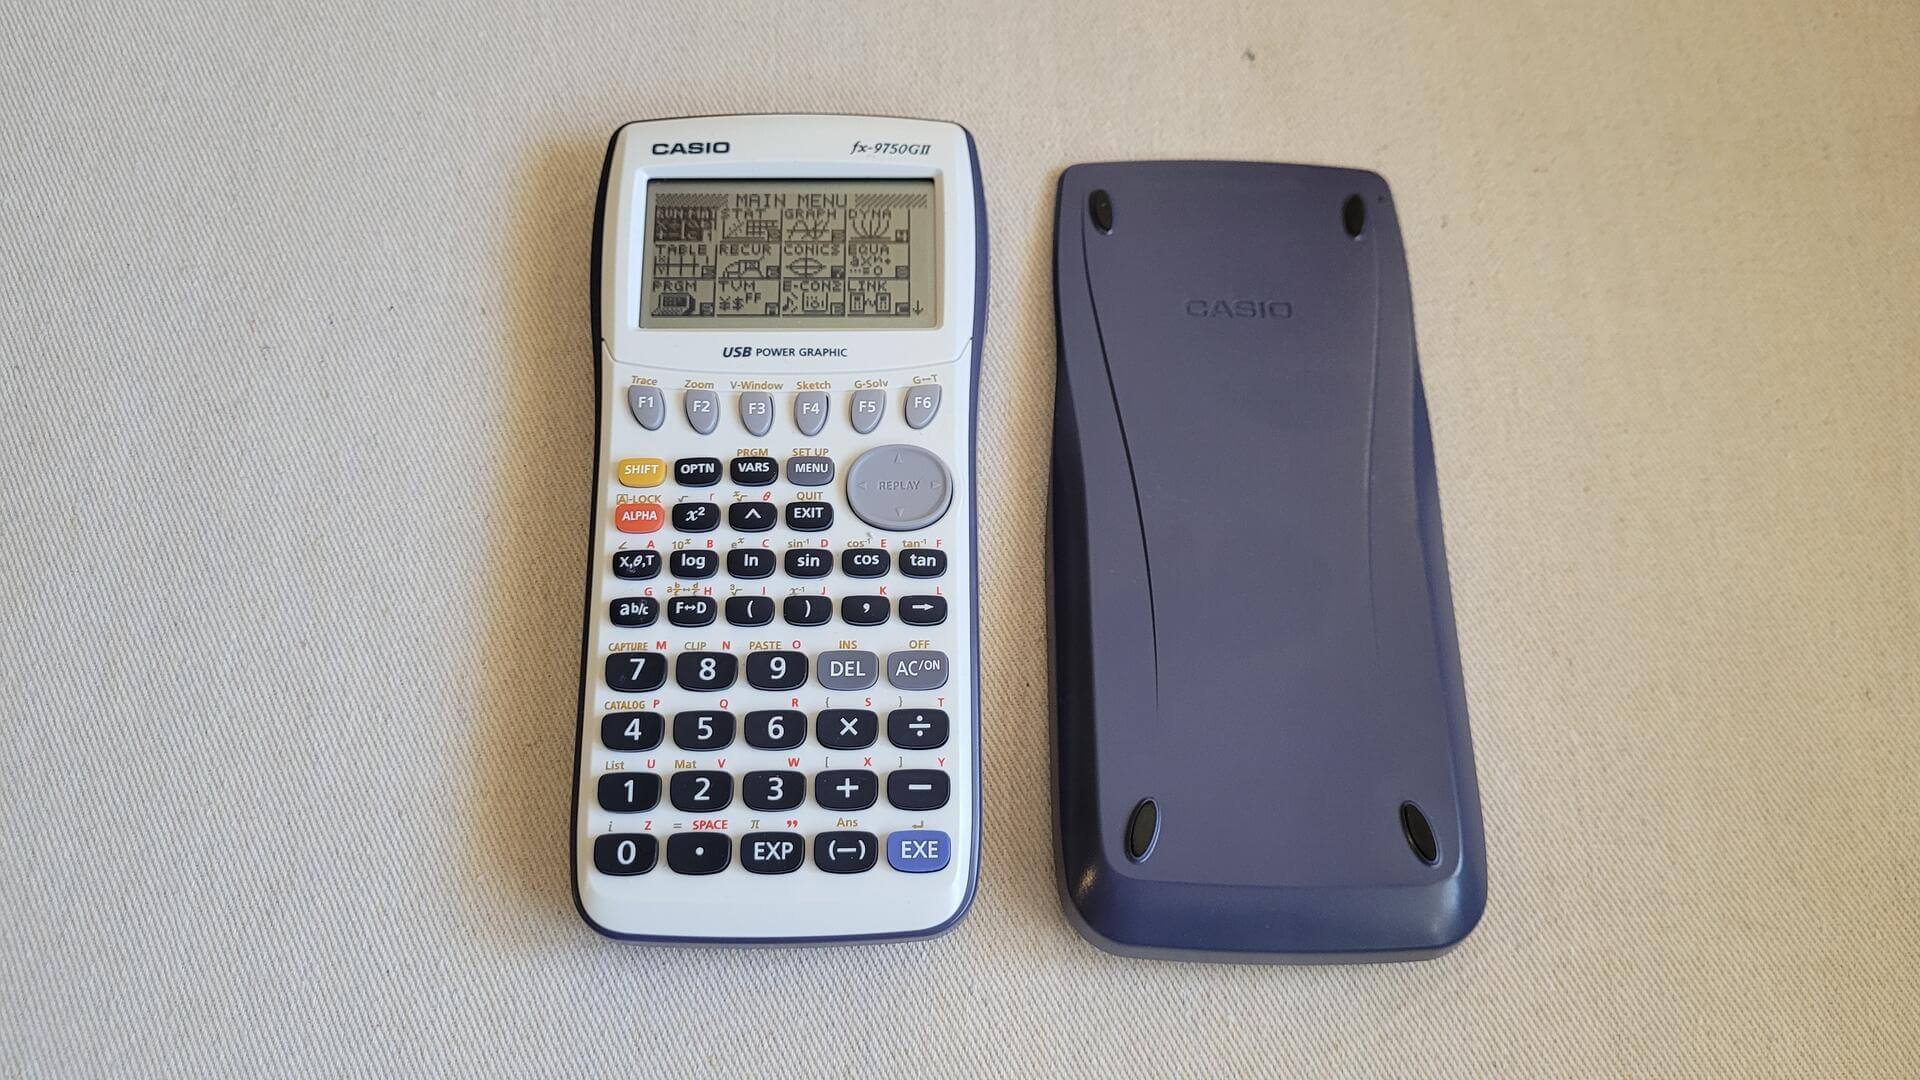 Casio FX-9750GII graphing calculator comes with numerous enhancements including USB connectivity, AP statistics features, pie charts, bar graphs and more